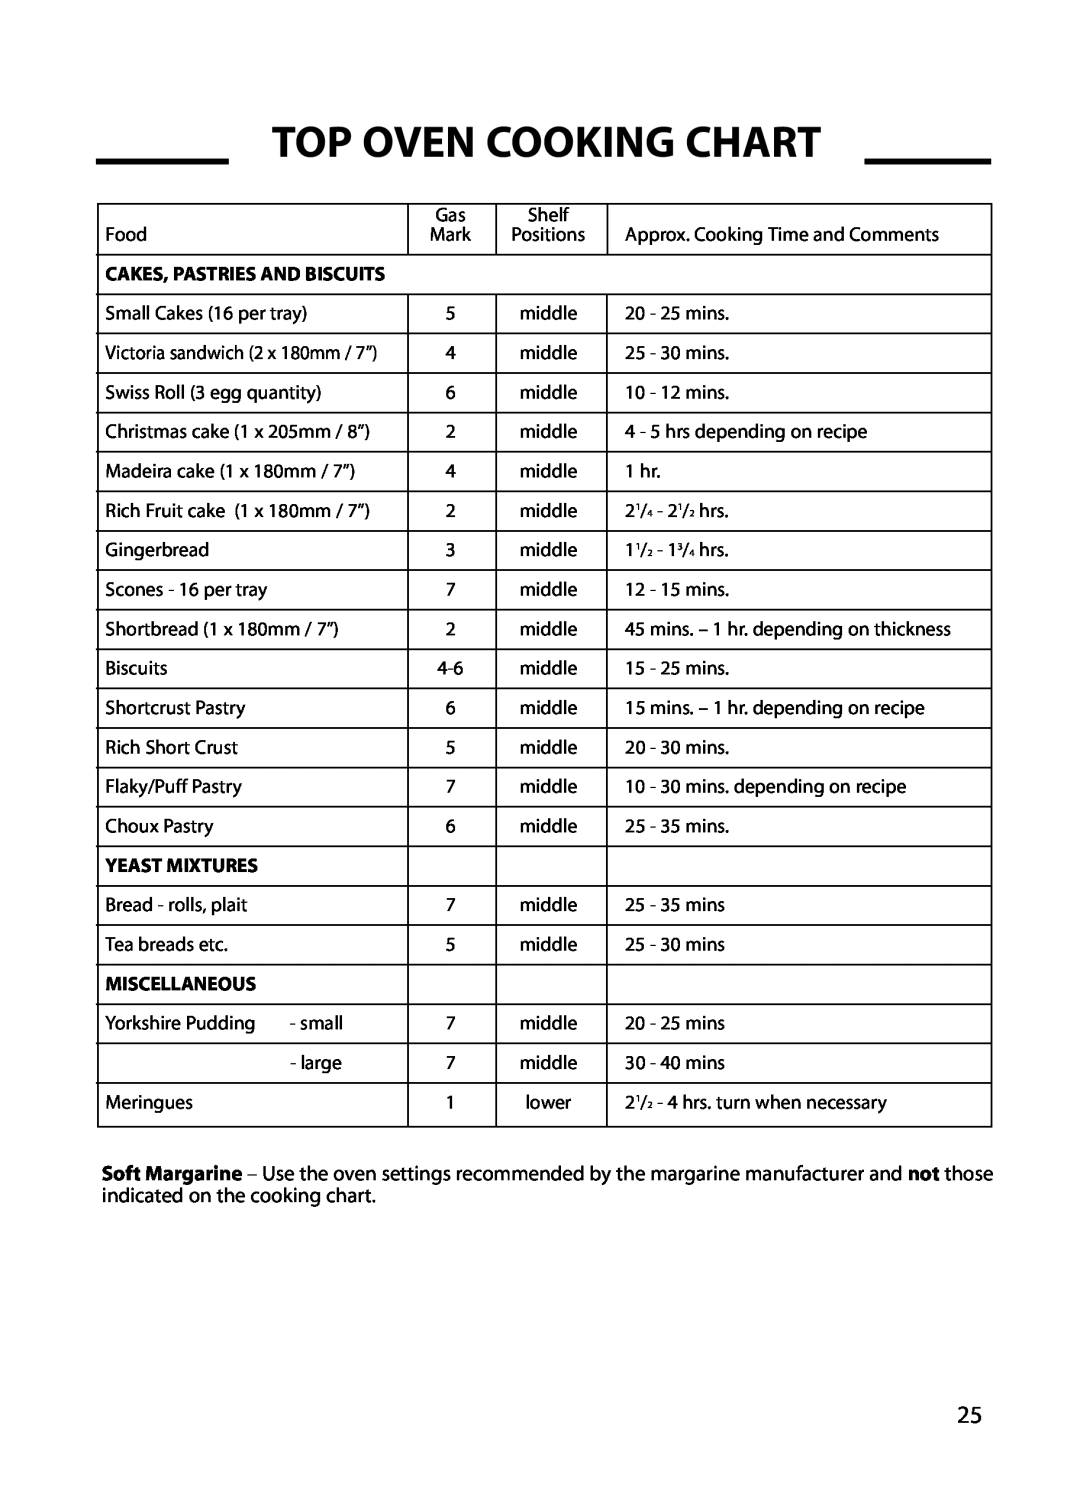 Hotpoint GW54, GW66, GW62, 6 DOG manual Top Oven Cooking Chart, Shelf, Yeast Mixtures, Miscellaneous 